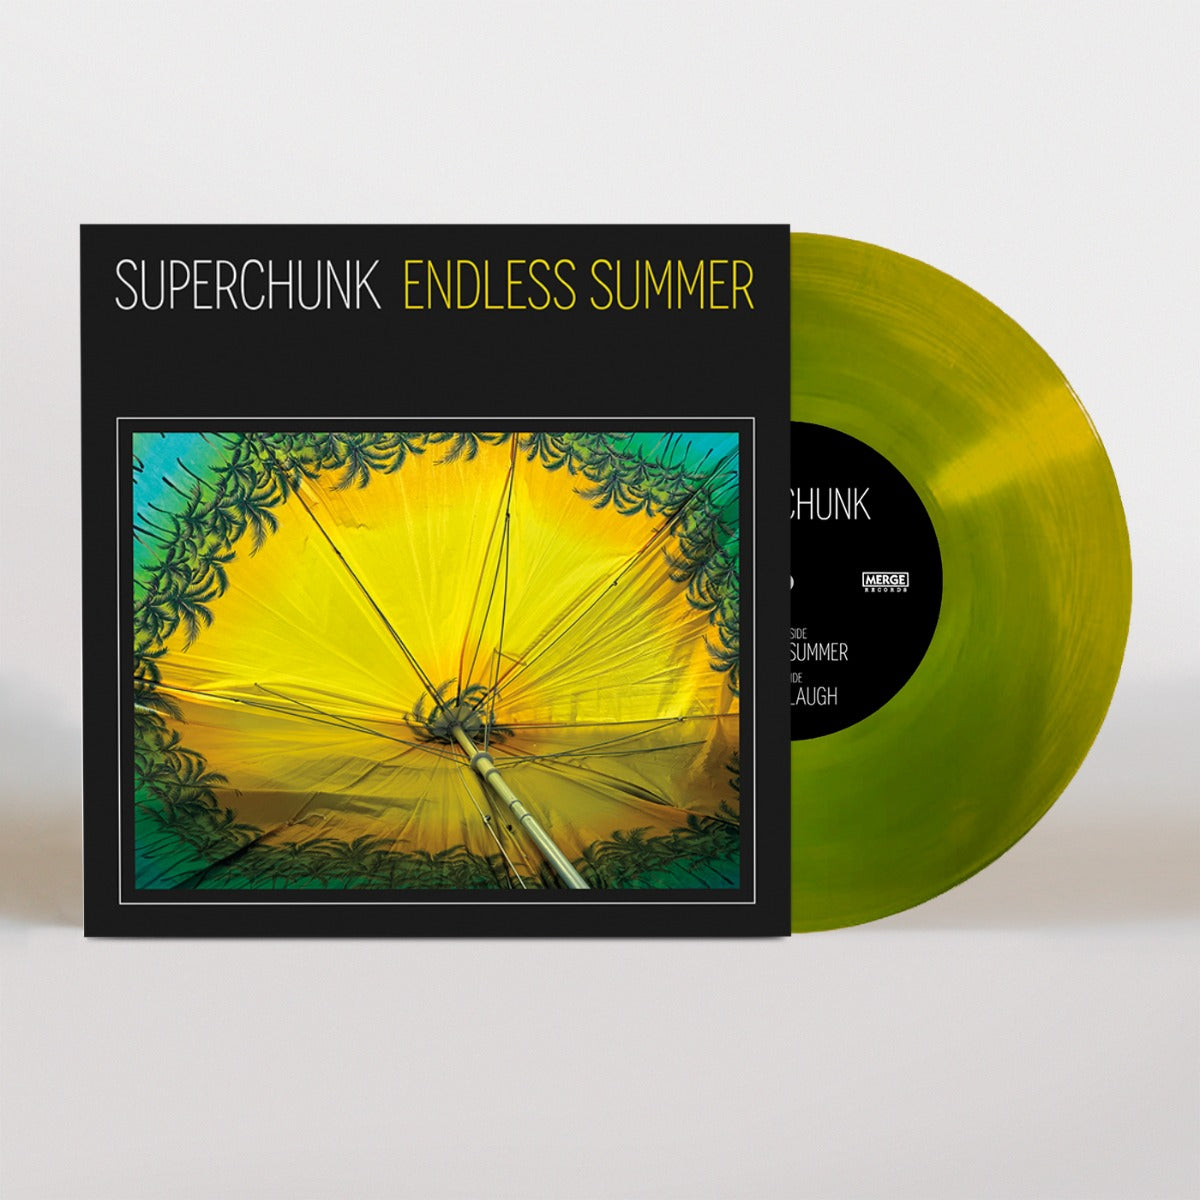 Superchunk  "Endless Summer" b/w "When I Laugh" 7-inch INDIE EXCLUSIVE VARIANT Vinyl